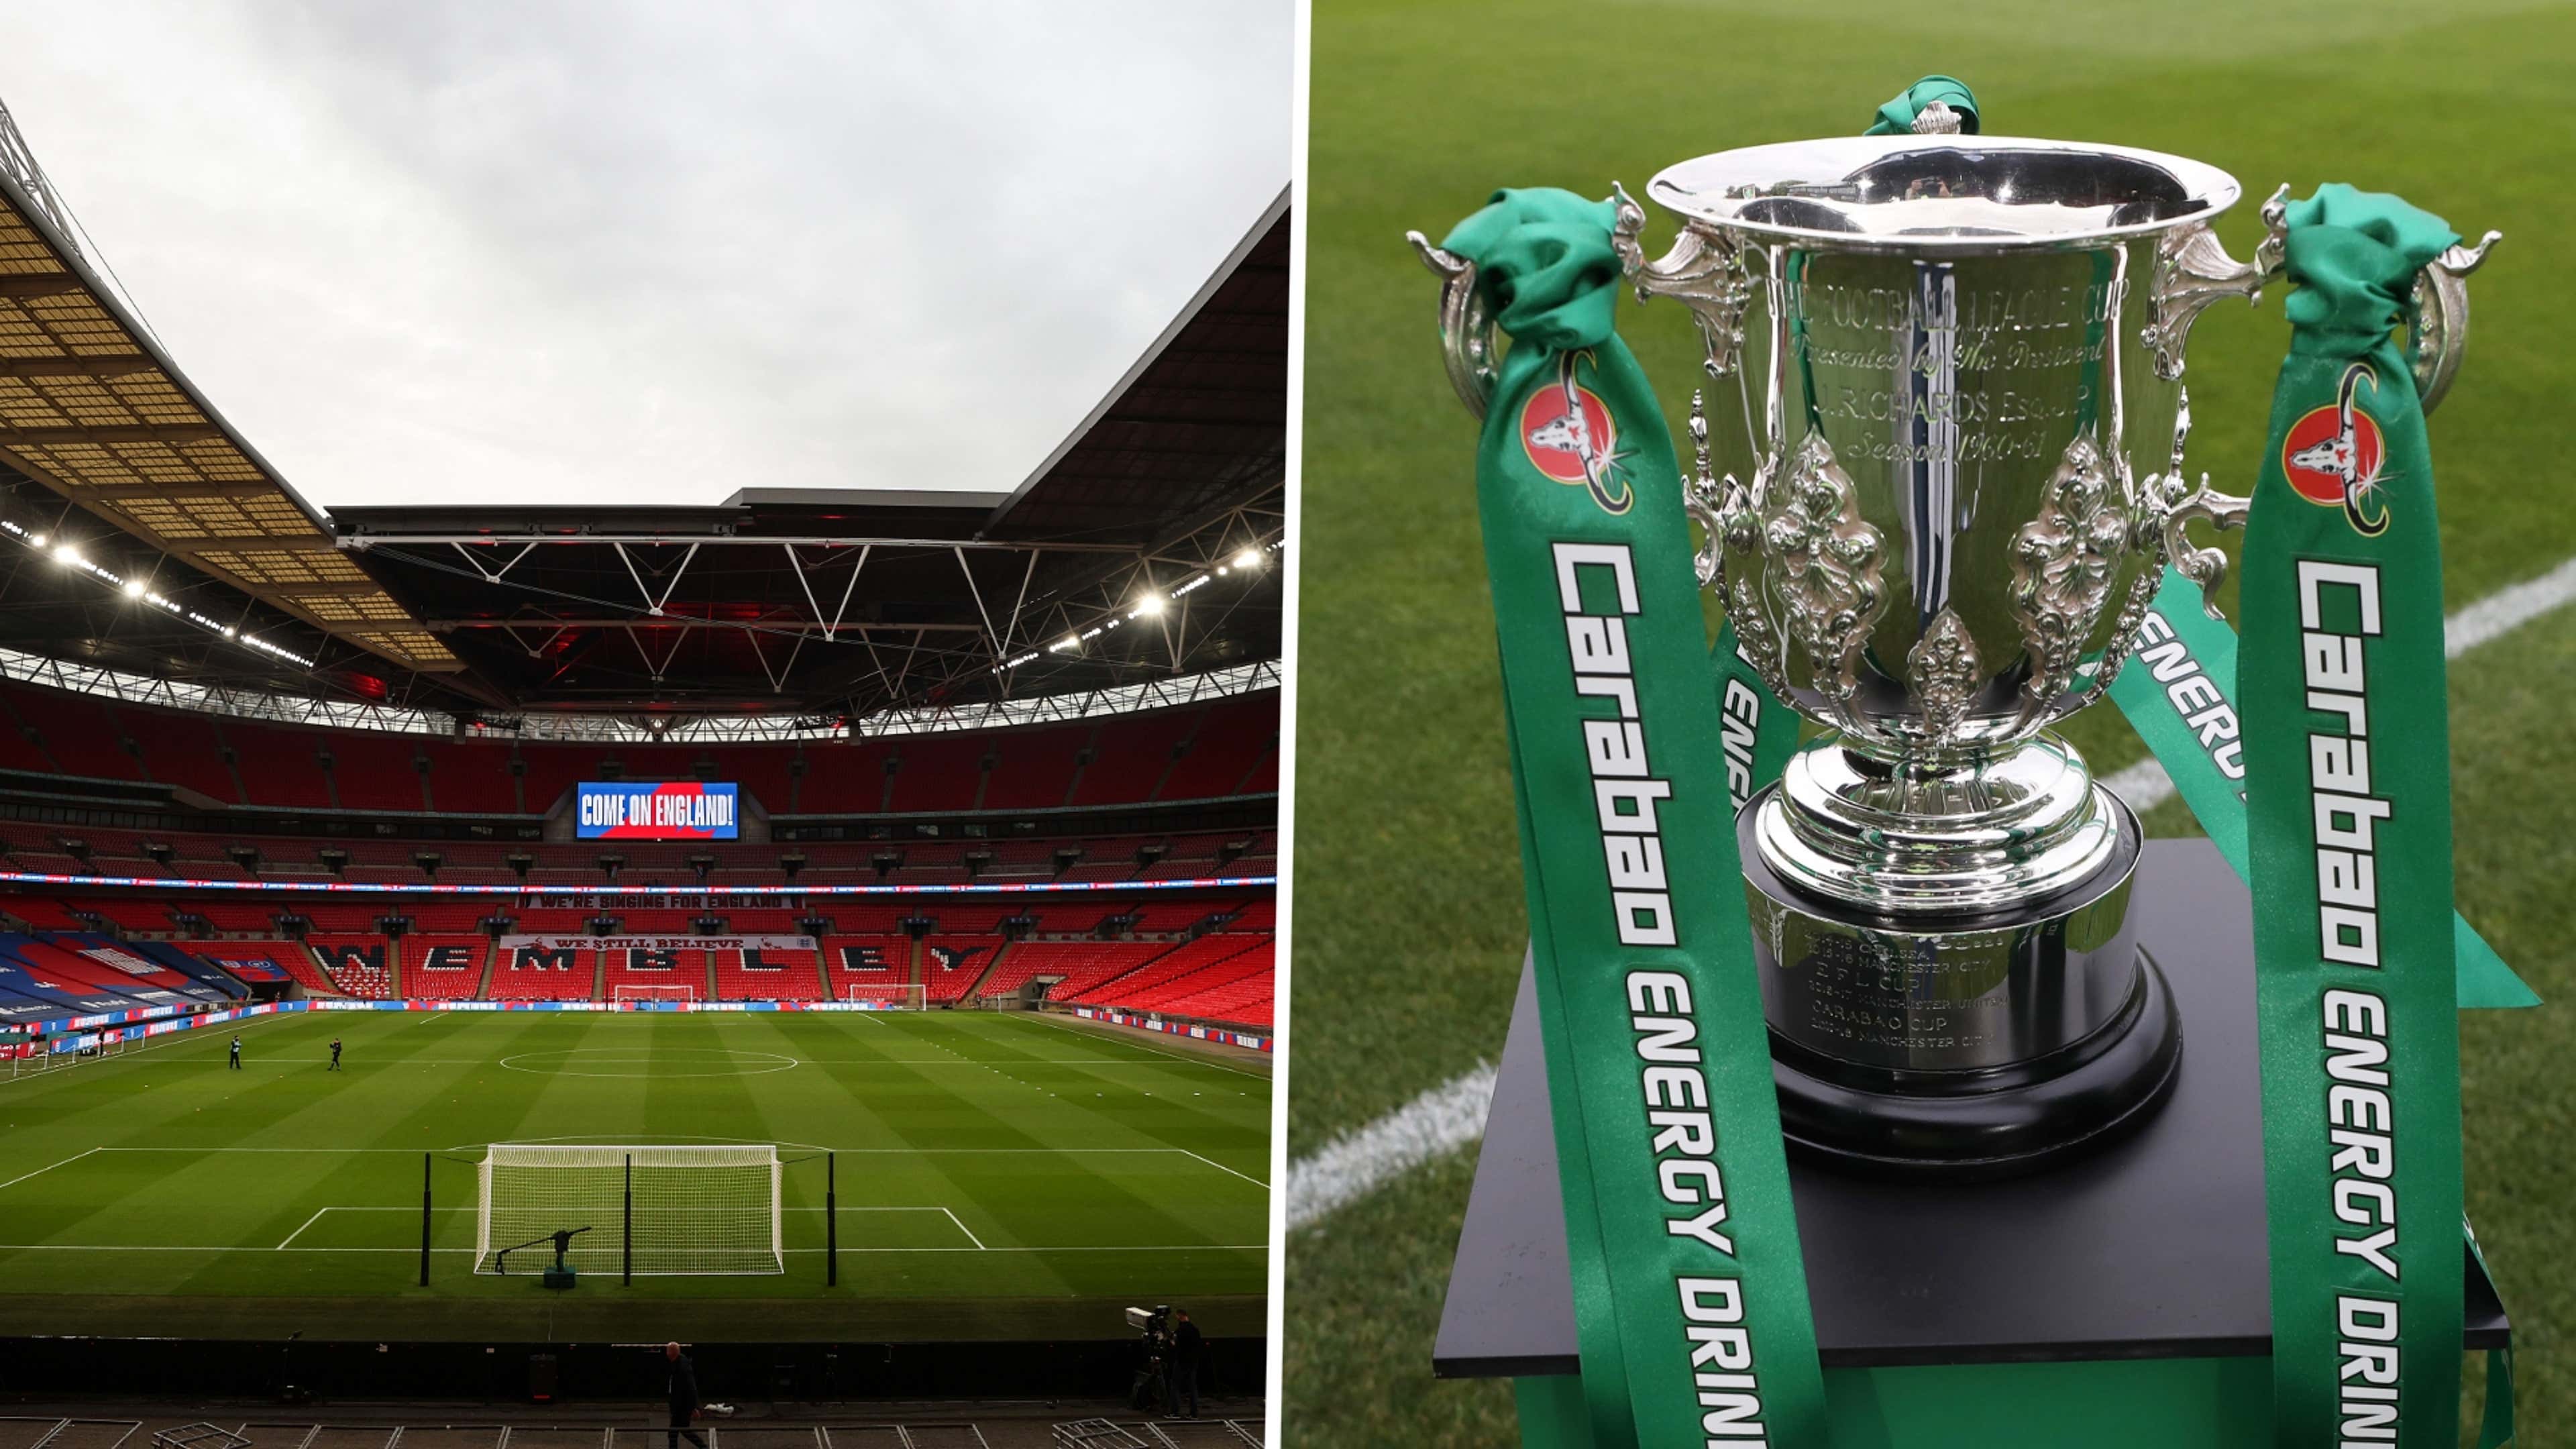 Carabao Cup 2022-23: Draw, fixtures, results & guide to each round